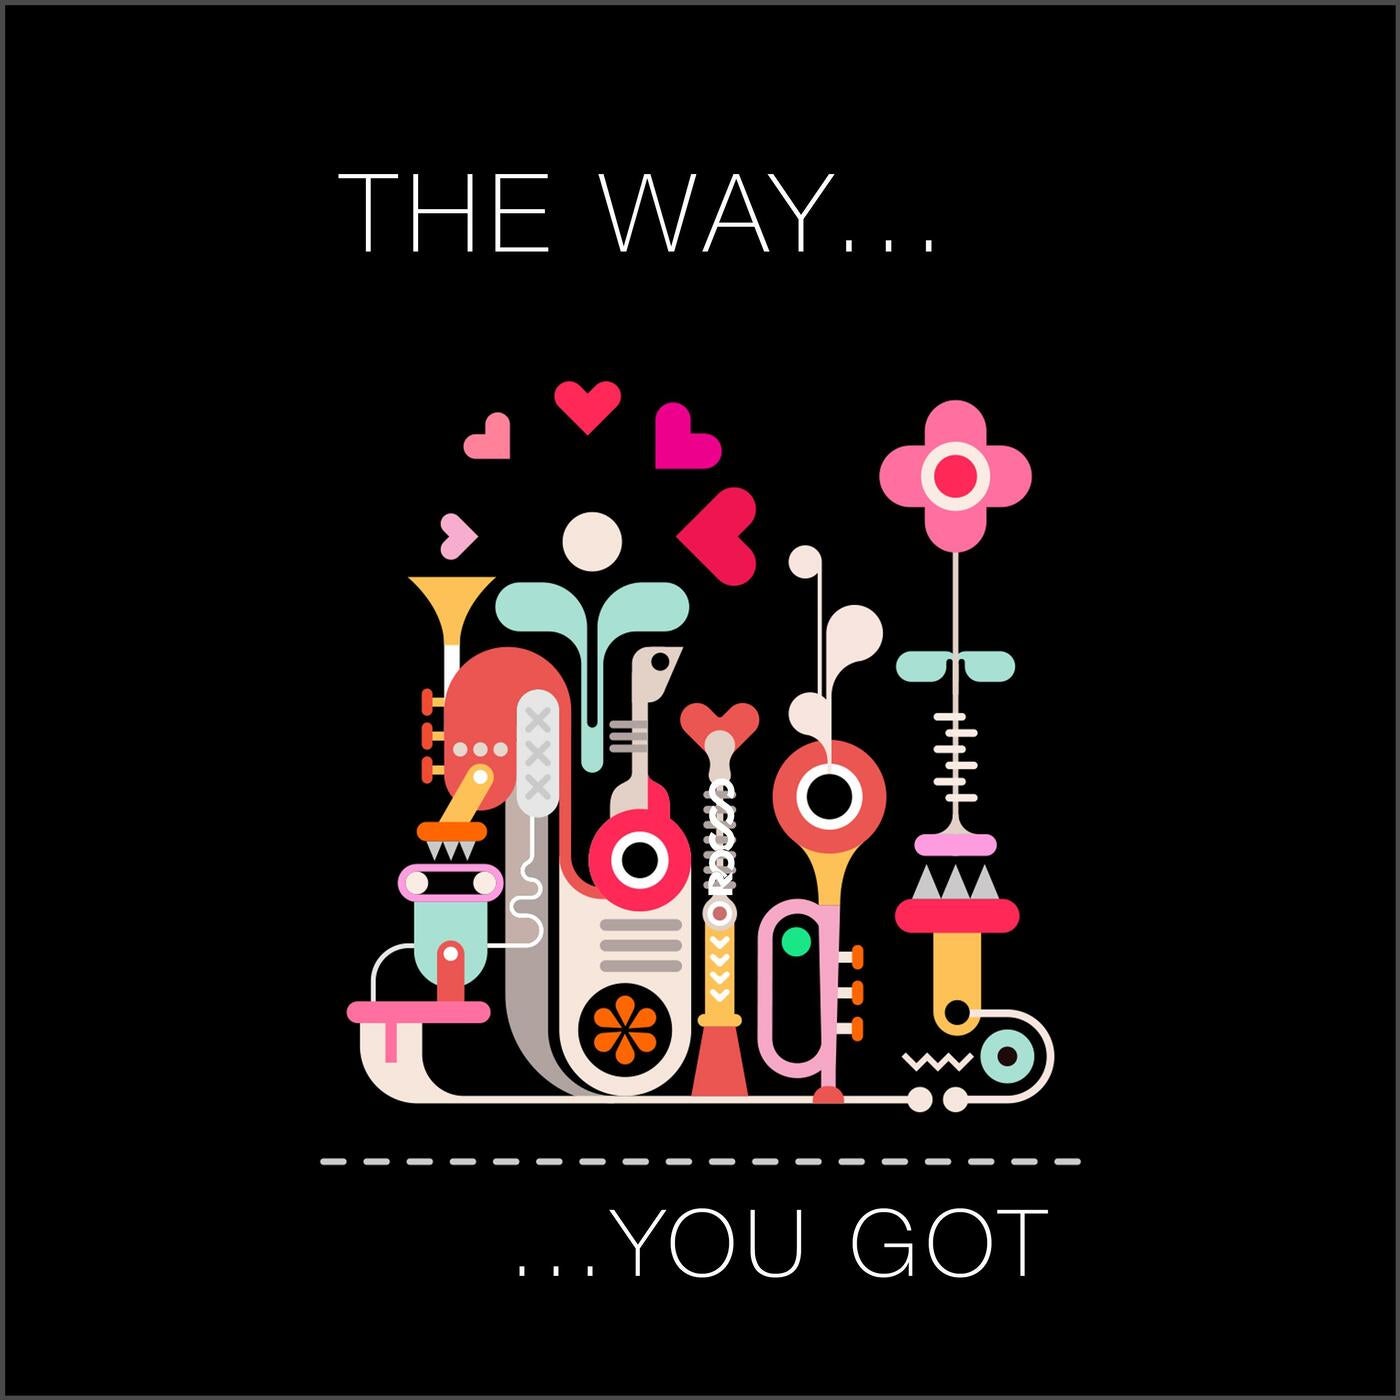 The Way (You Got...)